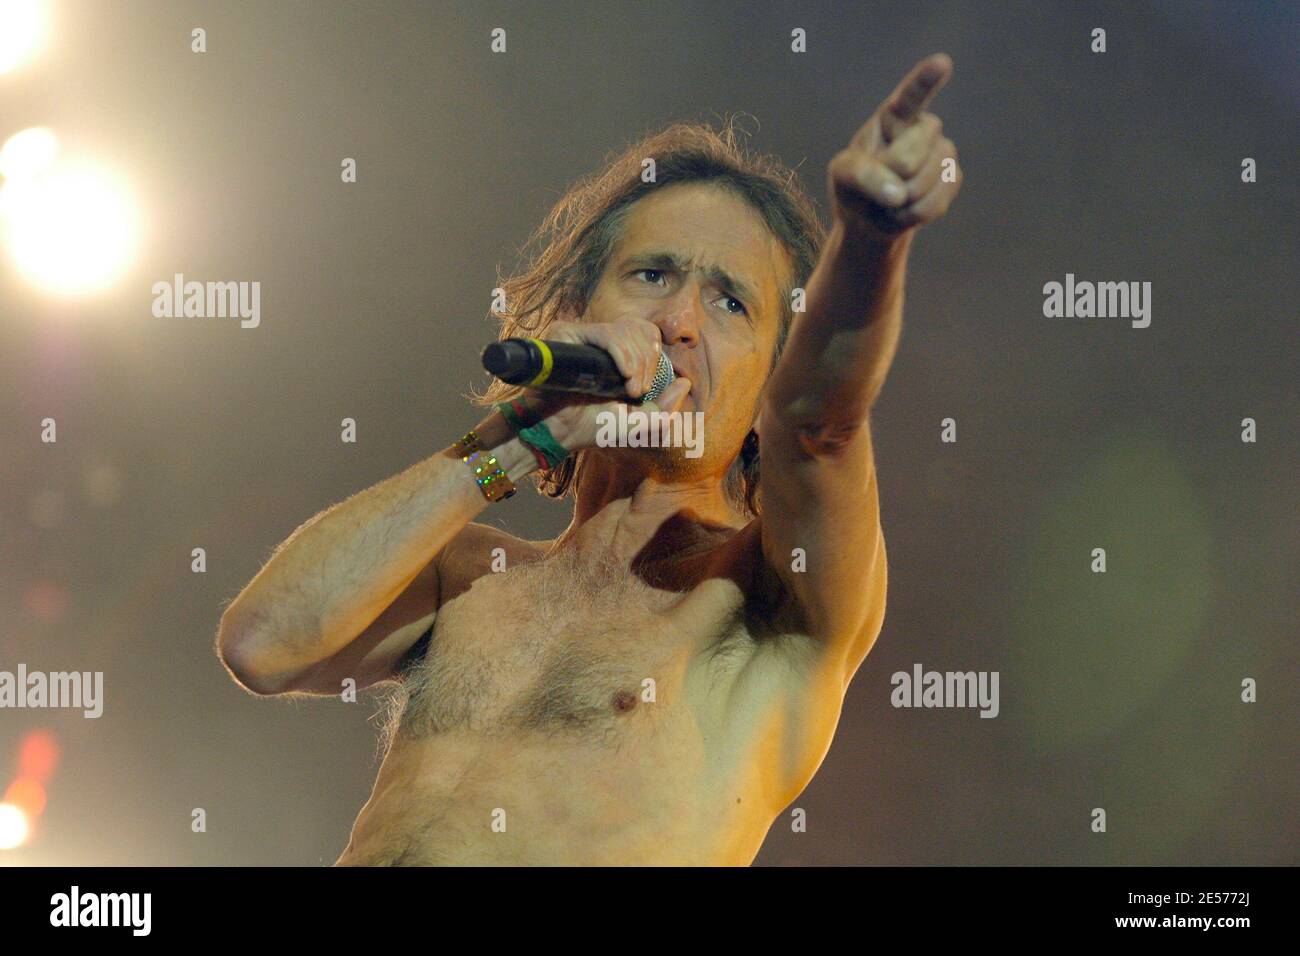 Singer Didier Wampas from the French band les Wampas performs on stage on the third and last day of the annual AIDS charity and fundraising music festival 'Solidays', held at Longchamp racetrack in Paris, France, on July 6, 2008. Photo by DS/ABACAPRESS.COM Stock Photo